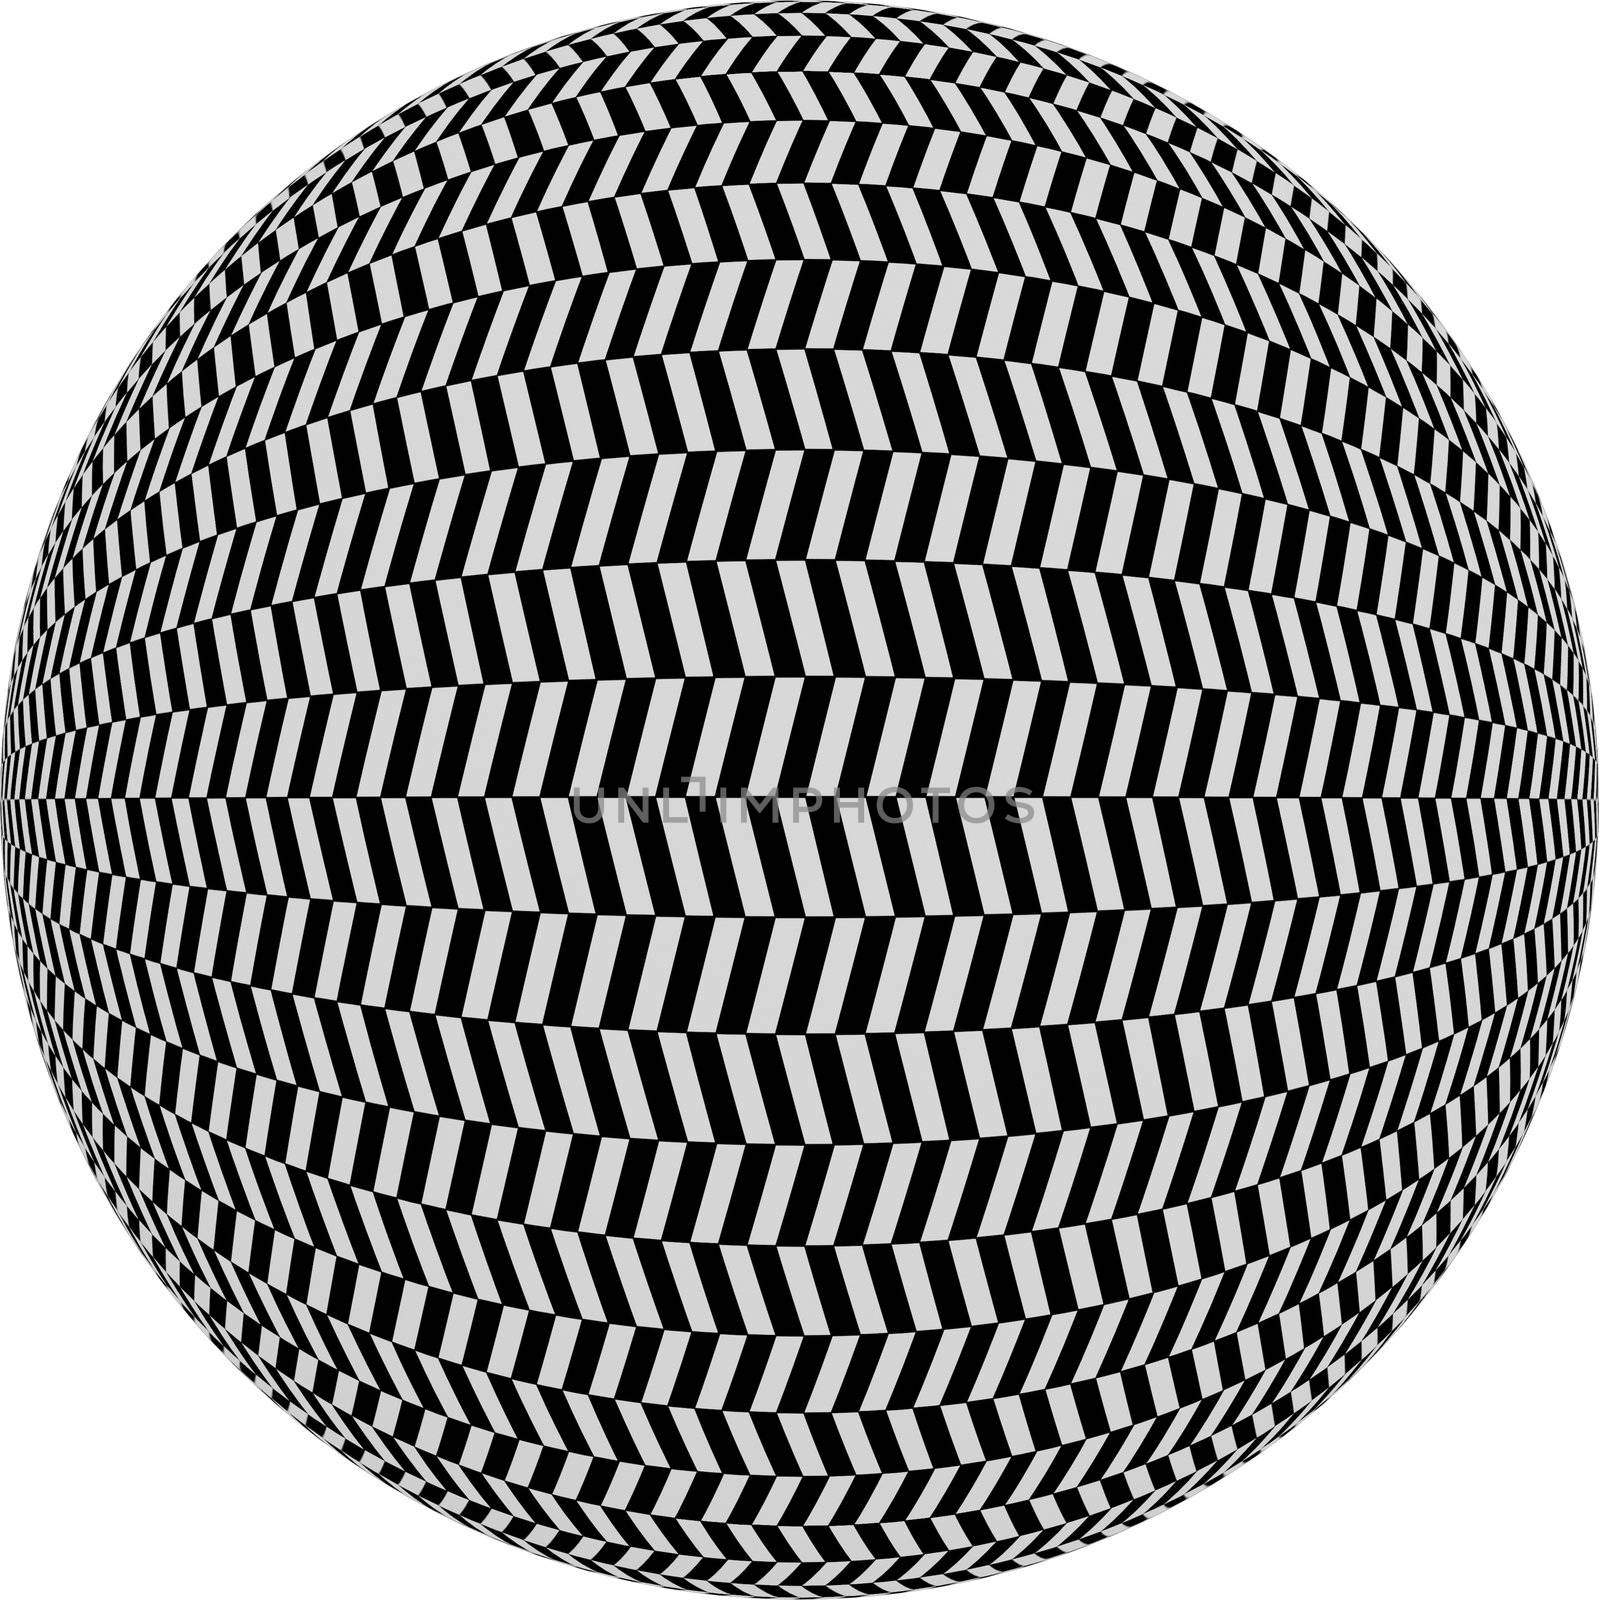 Patterned Sphere by jeremywhat